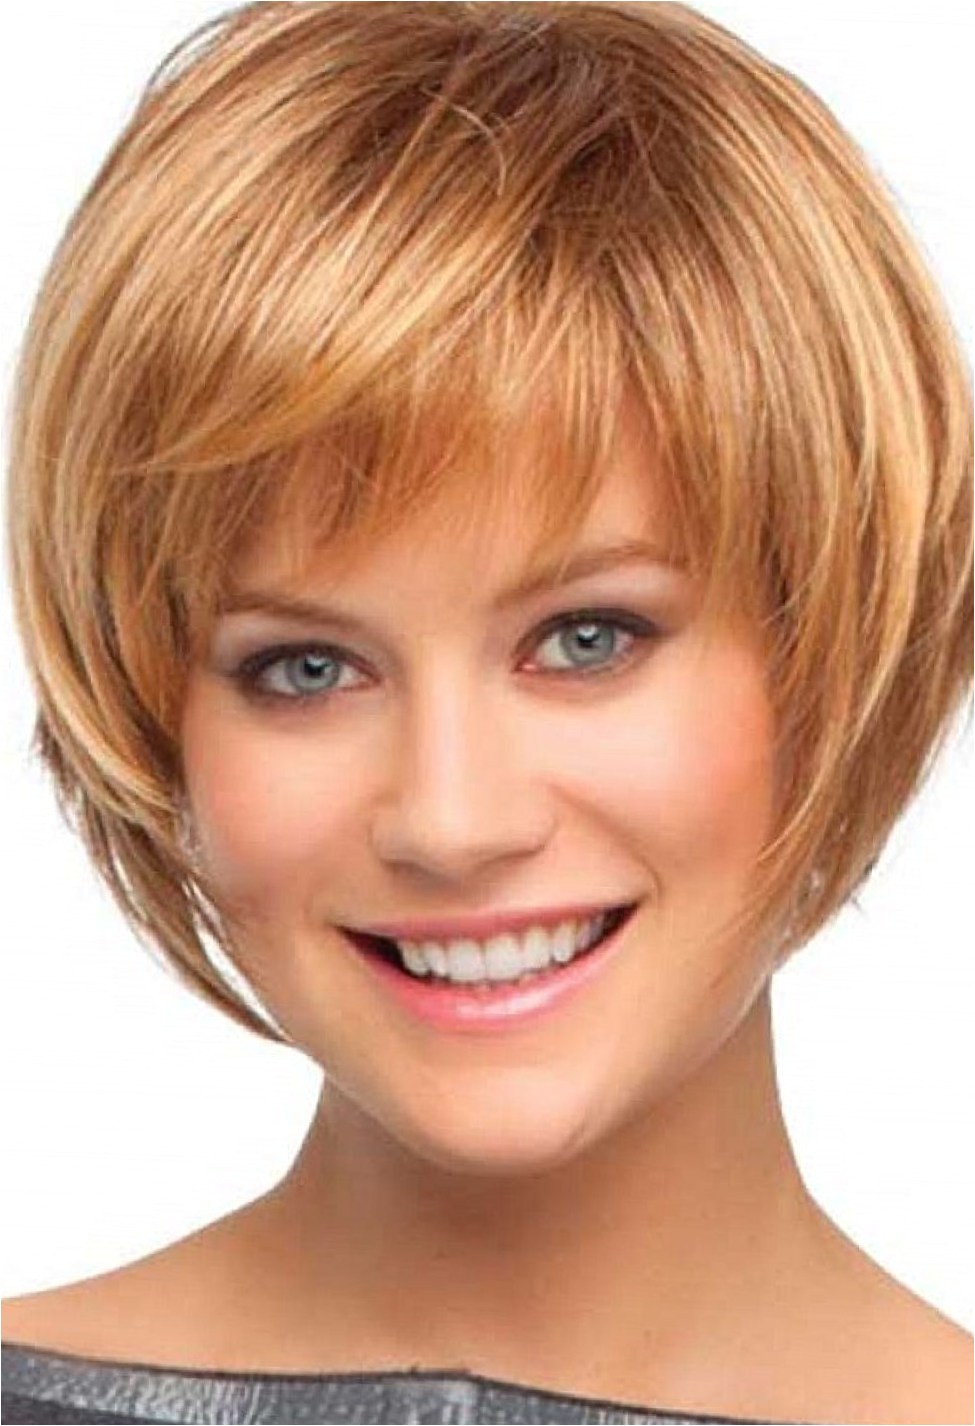 Bob Style Haircut Pictures Short Bob Hairstyles with Bangs 4 Perfect Ideas for You